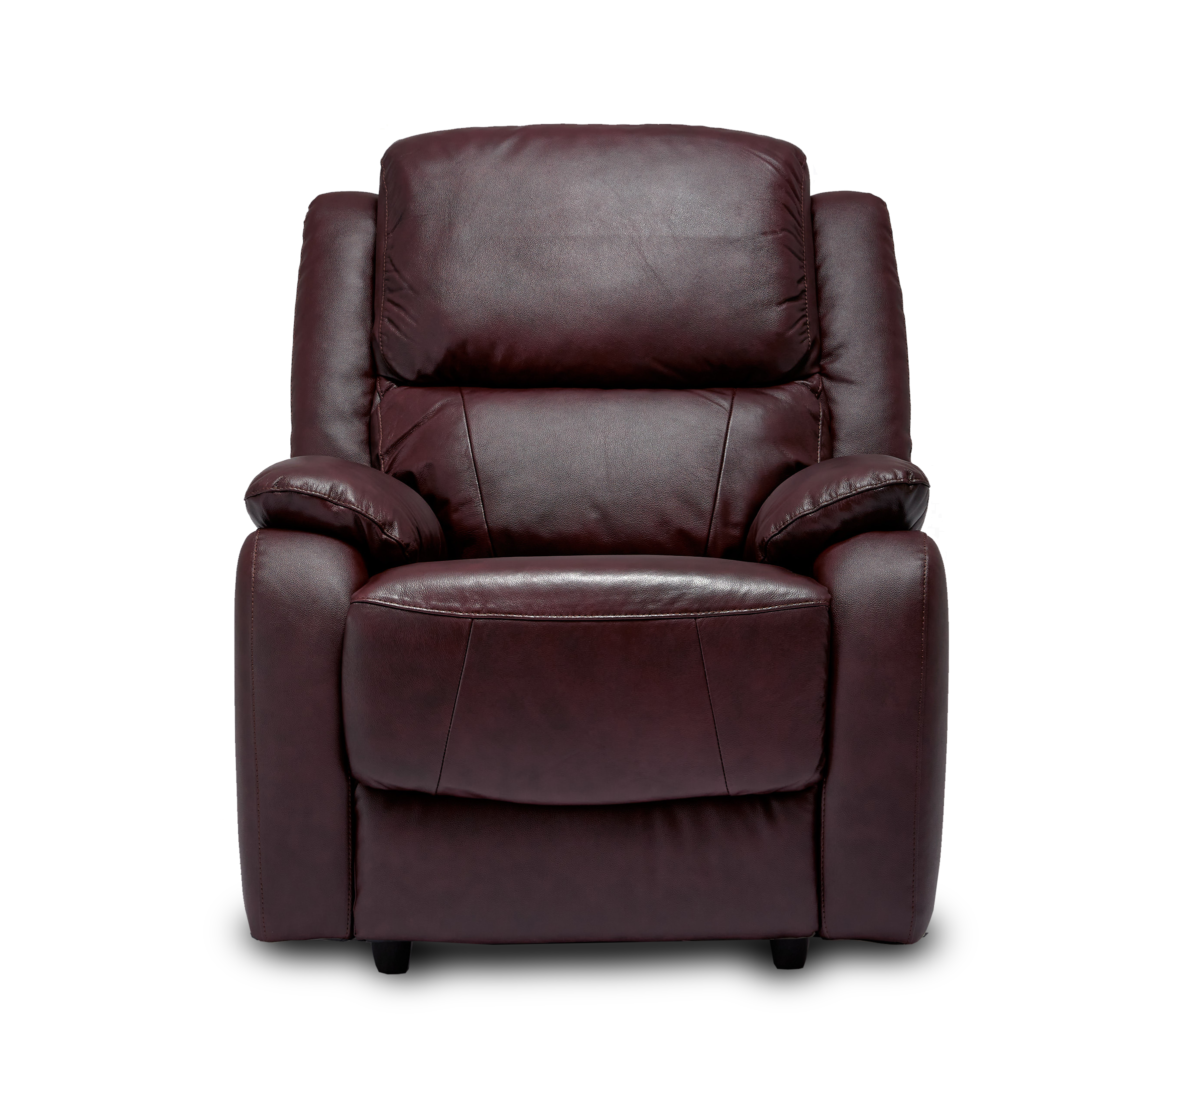 Palermo Recliner chair Red wine